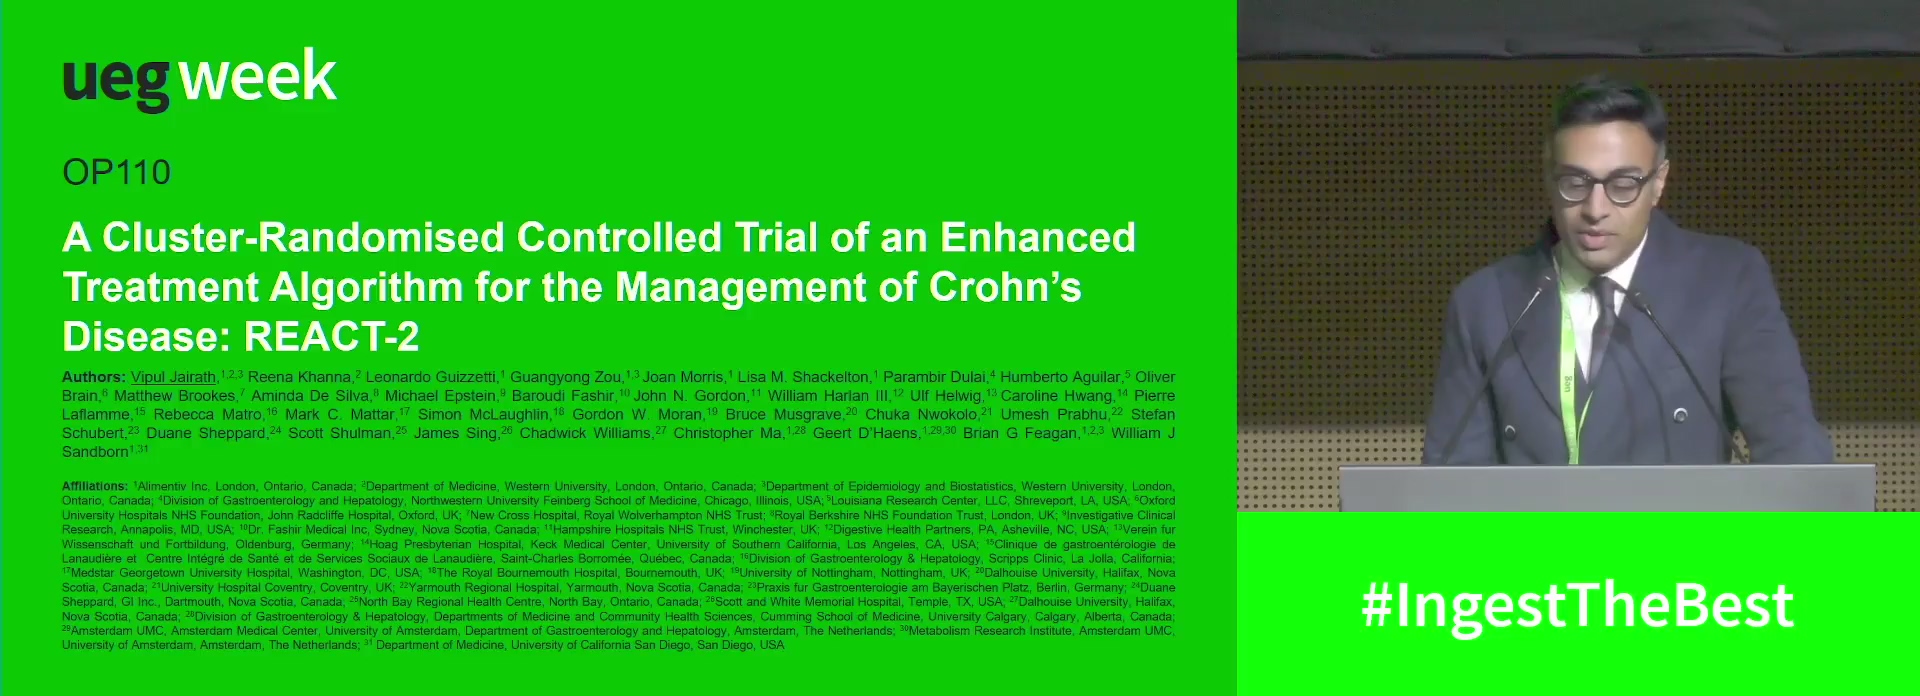 A CLUSTER-RANDOMISED CONTROLLED TRIAL OF AN ENHANCED TREATMENT ALGORITHM FOR THE MANAGEMENT OF CROHN’S DISEASE: REACT-2